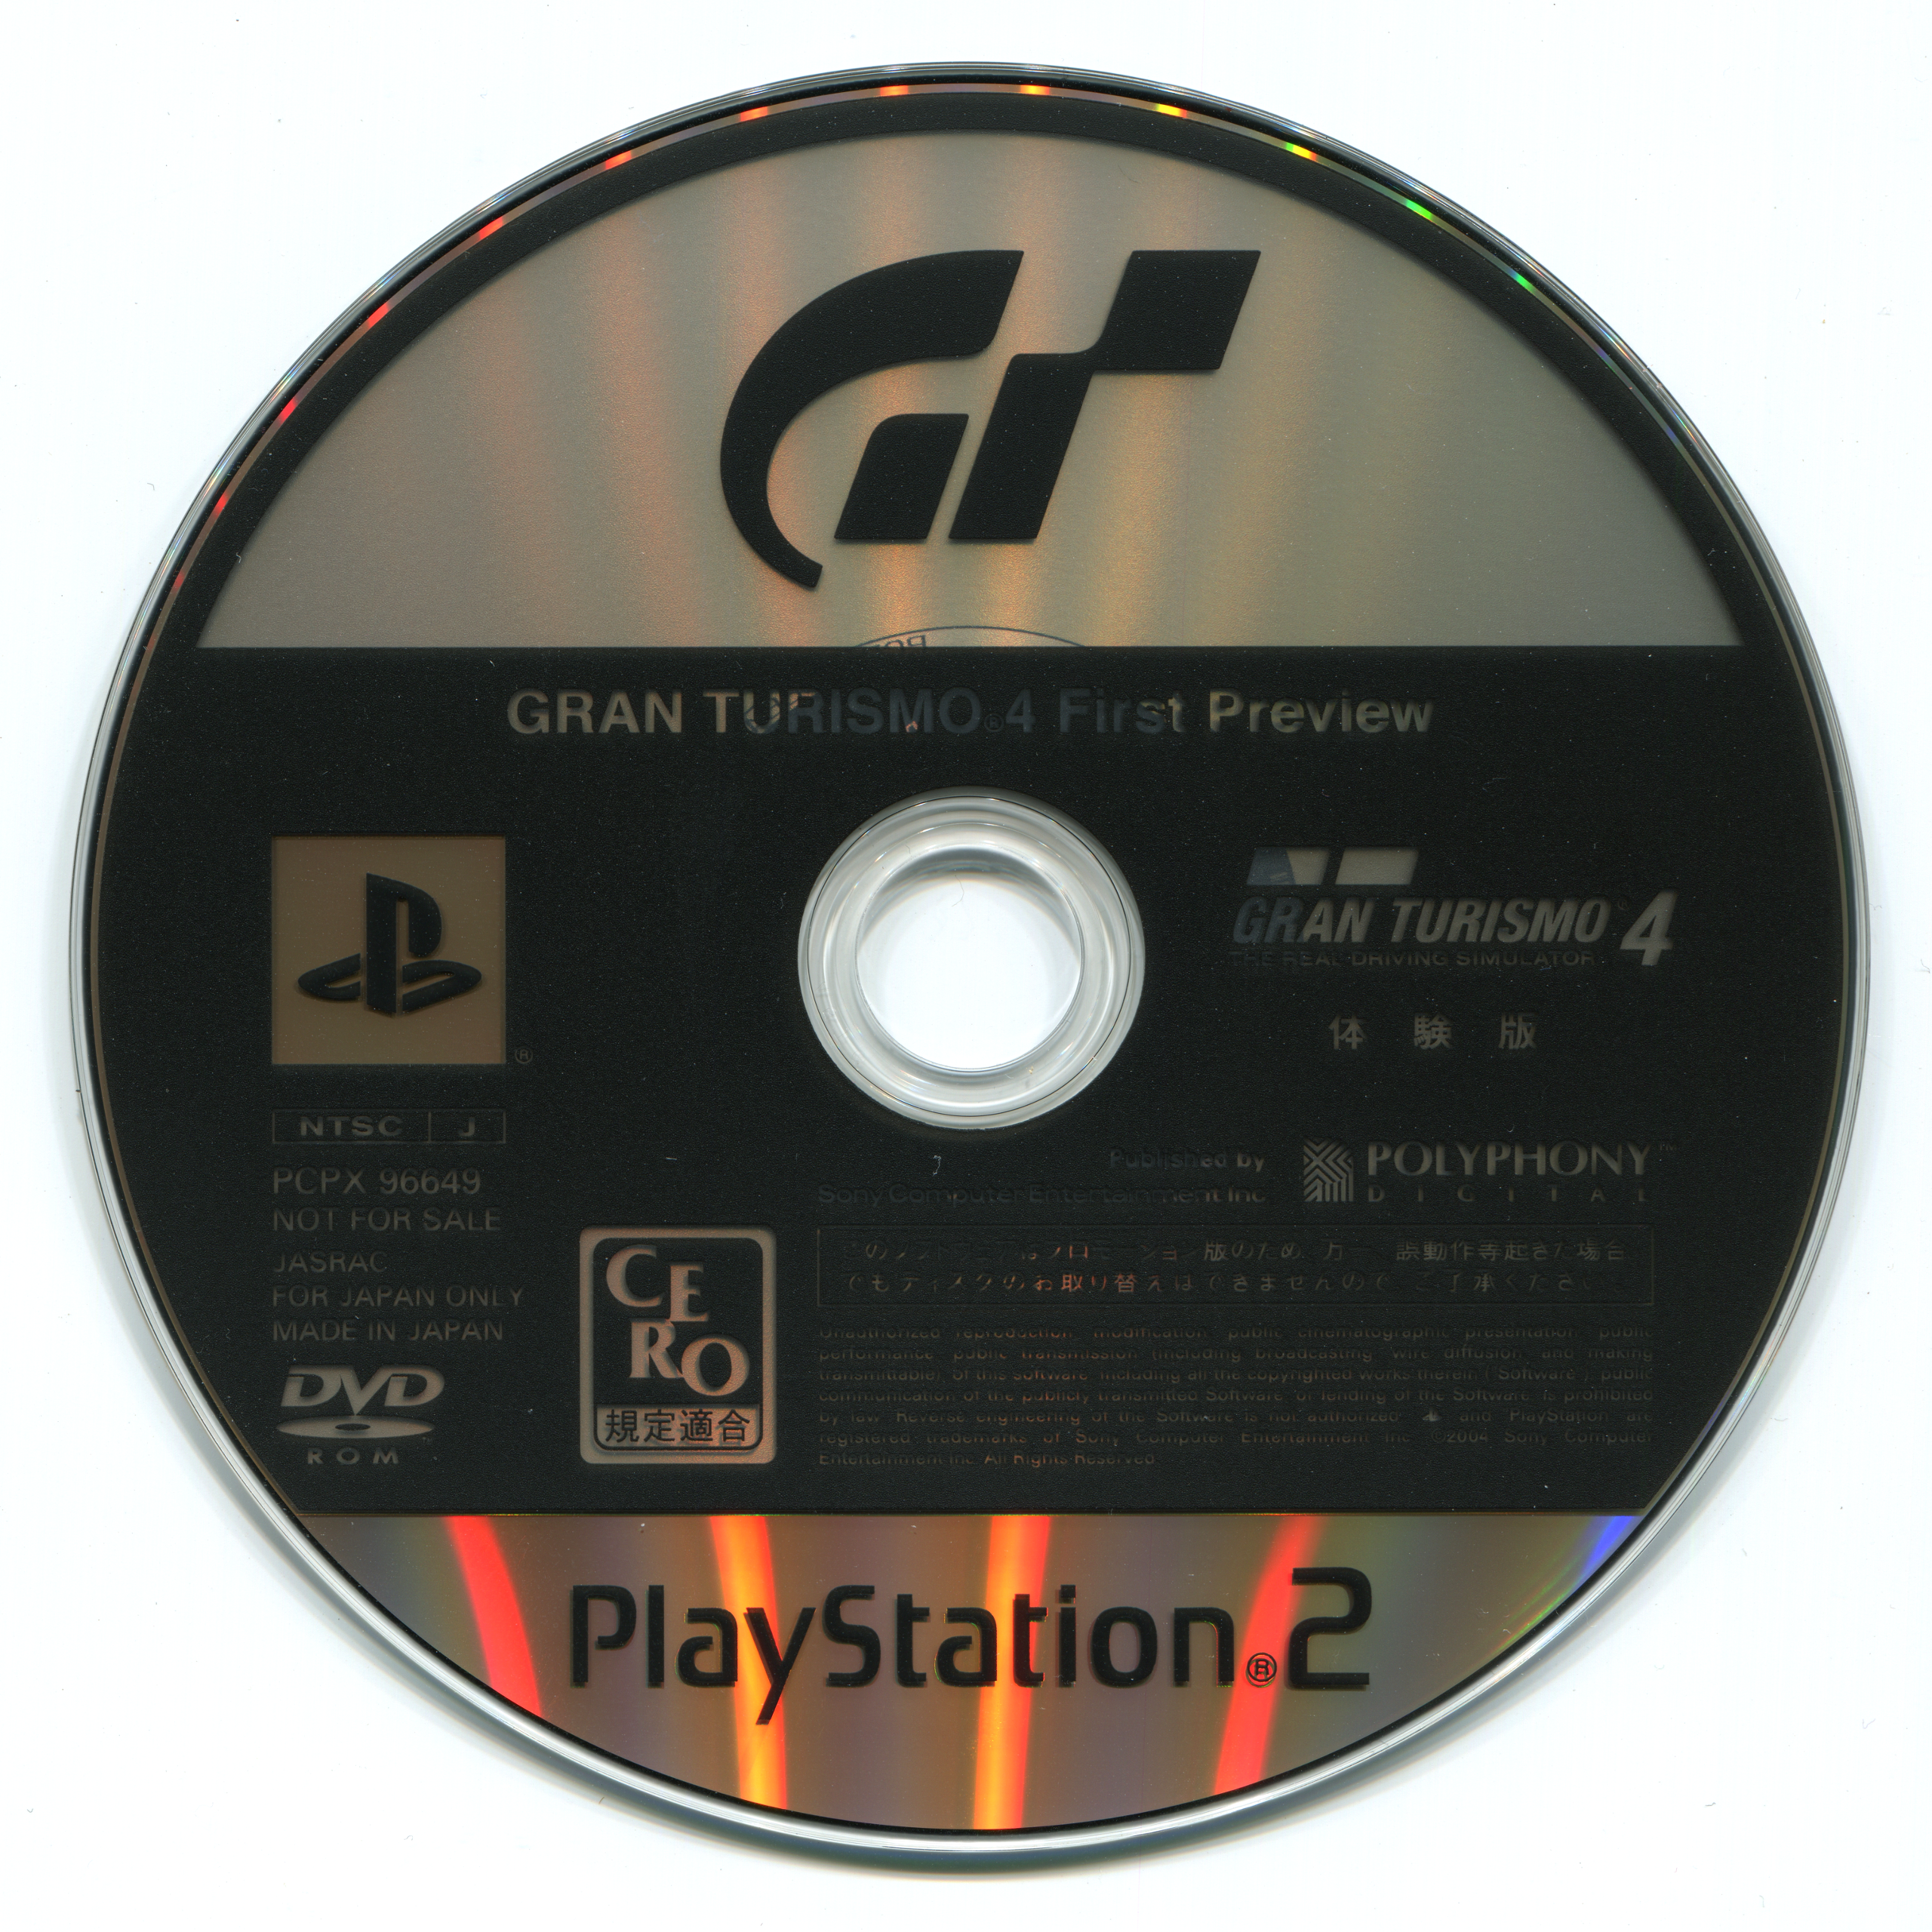 Gran Turismo 4 First Preview Polyphony Digital Free Download Borrow And Streaming Internet Archive